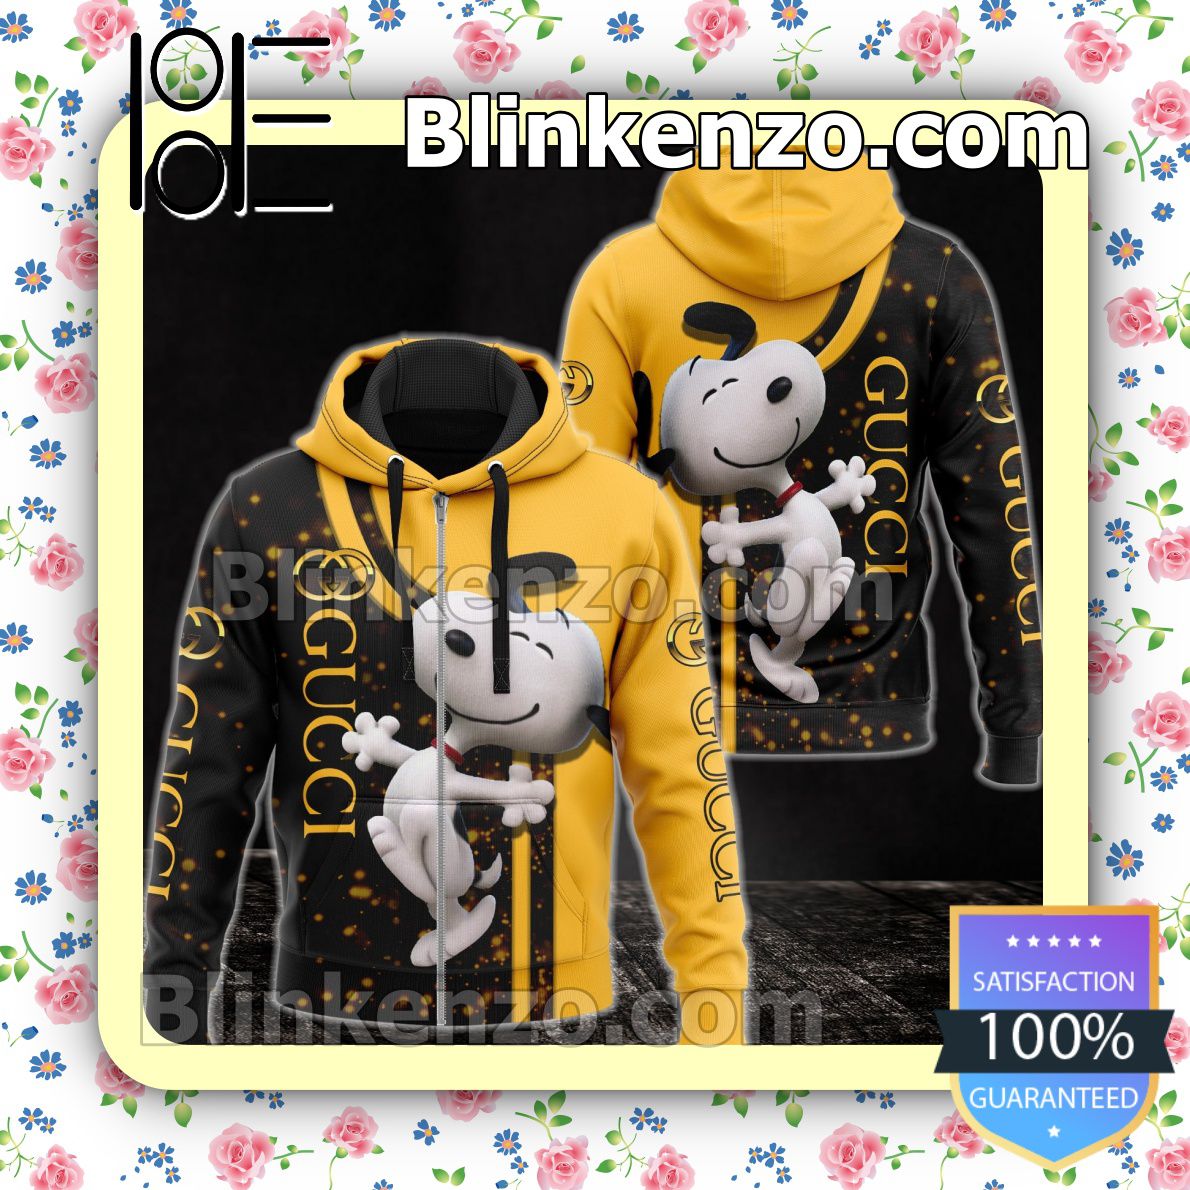 Great Quality Gucci With Snoopy Black And Yellow Full-Zip Hooded Fleece Sweatshirt